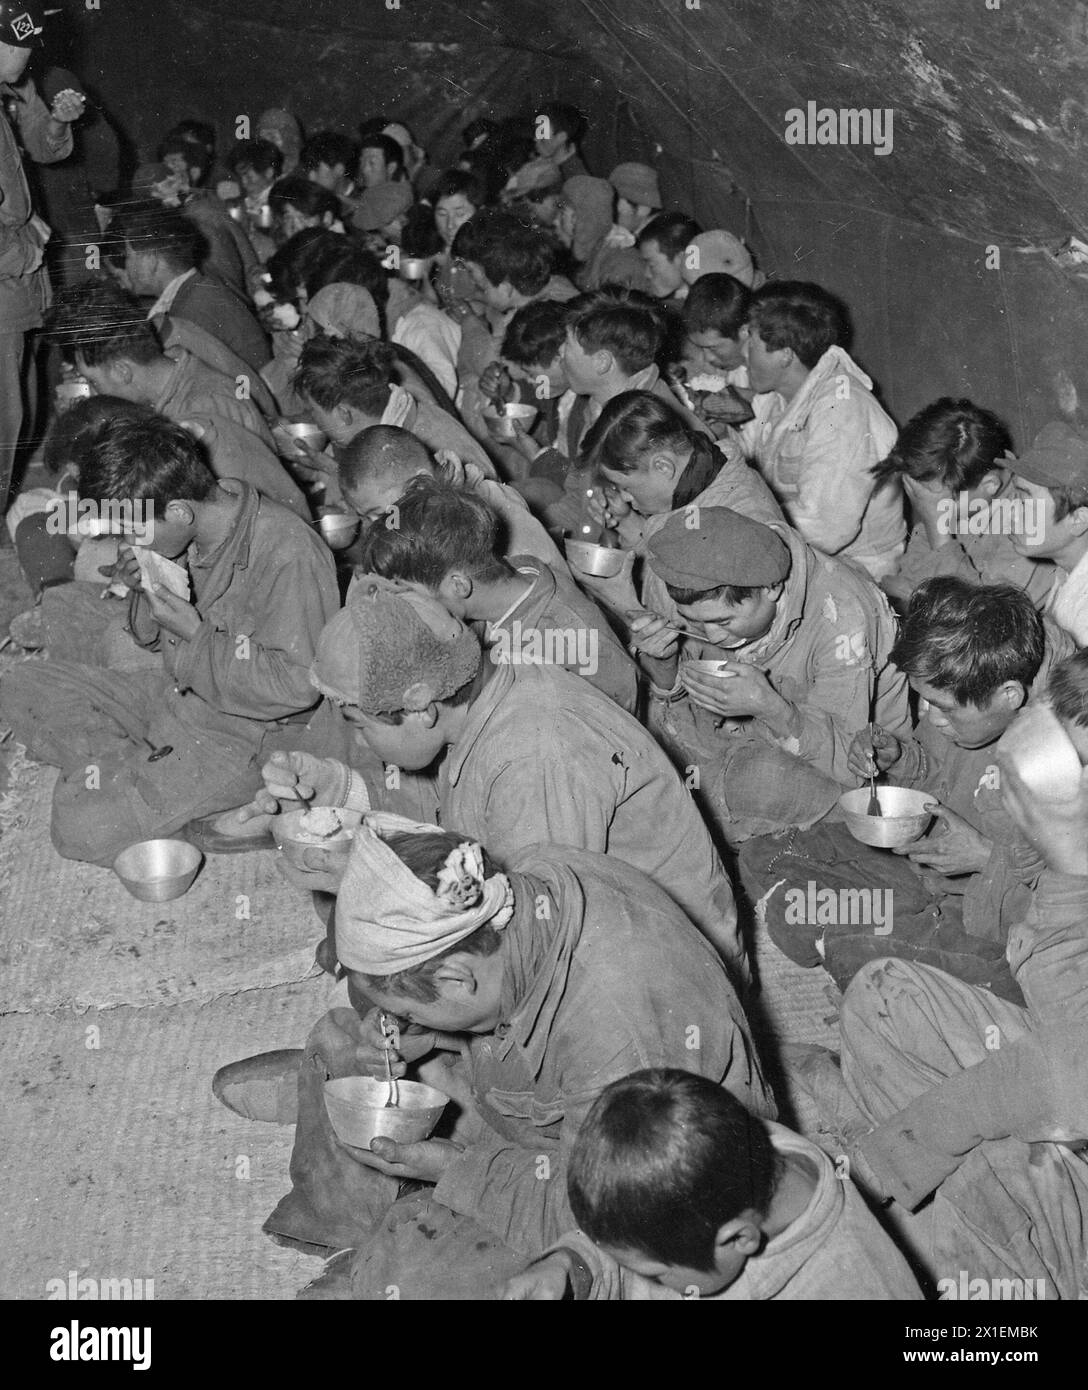 Communist guerrillas and their families, captured and brought down from Mount Chirisan, by elements of the Republic of Korea Capitol Division, are fed in the Prisoner of War stockade, Kurije, Korea ca. Decmeber 1951 Stock Photo